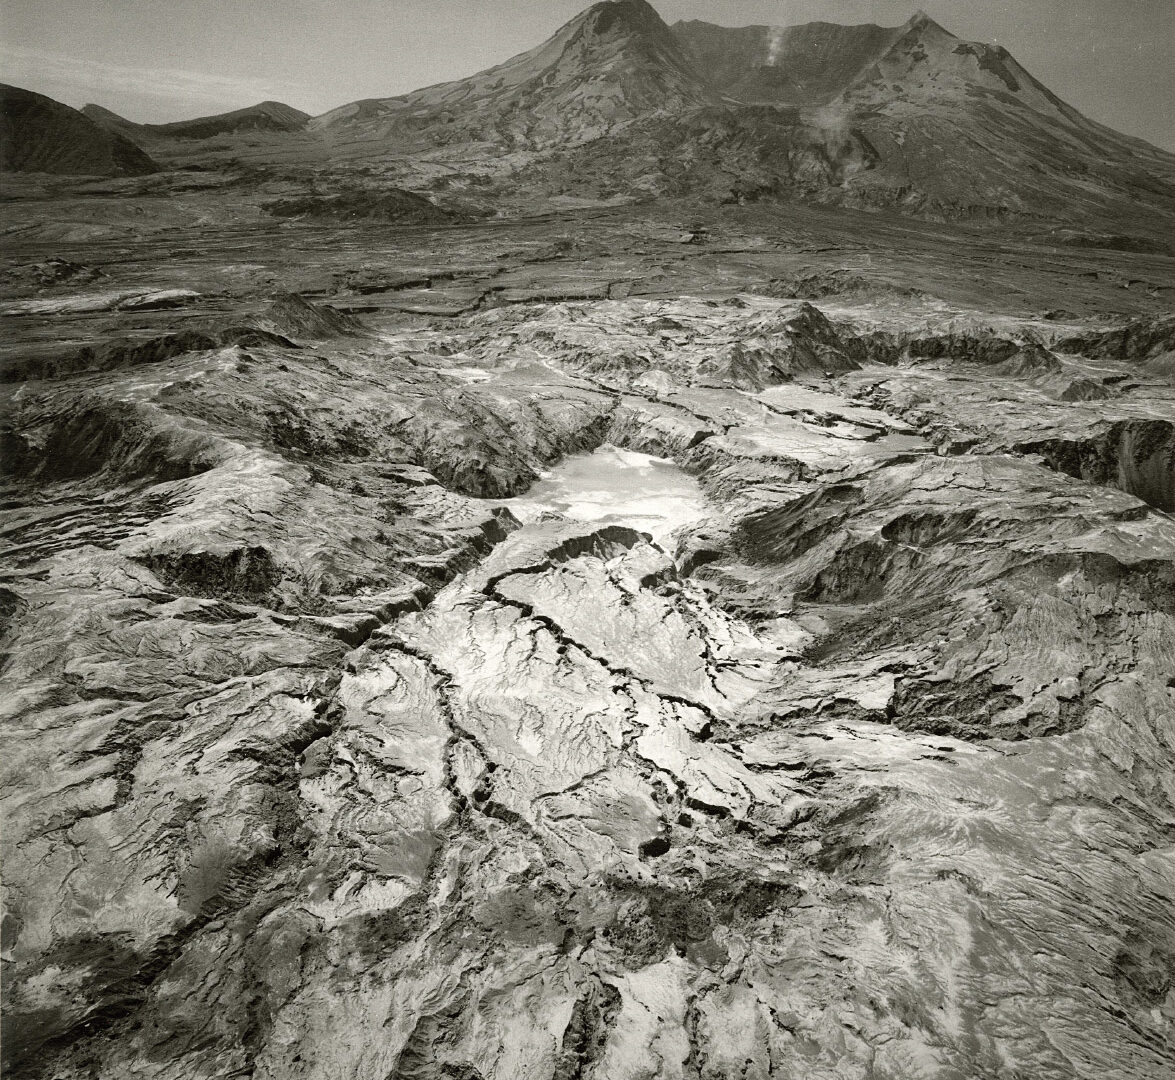 Black and white photo of lava flow from Mount Saint Helens